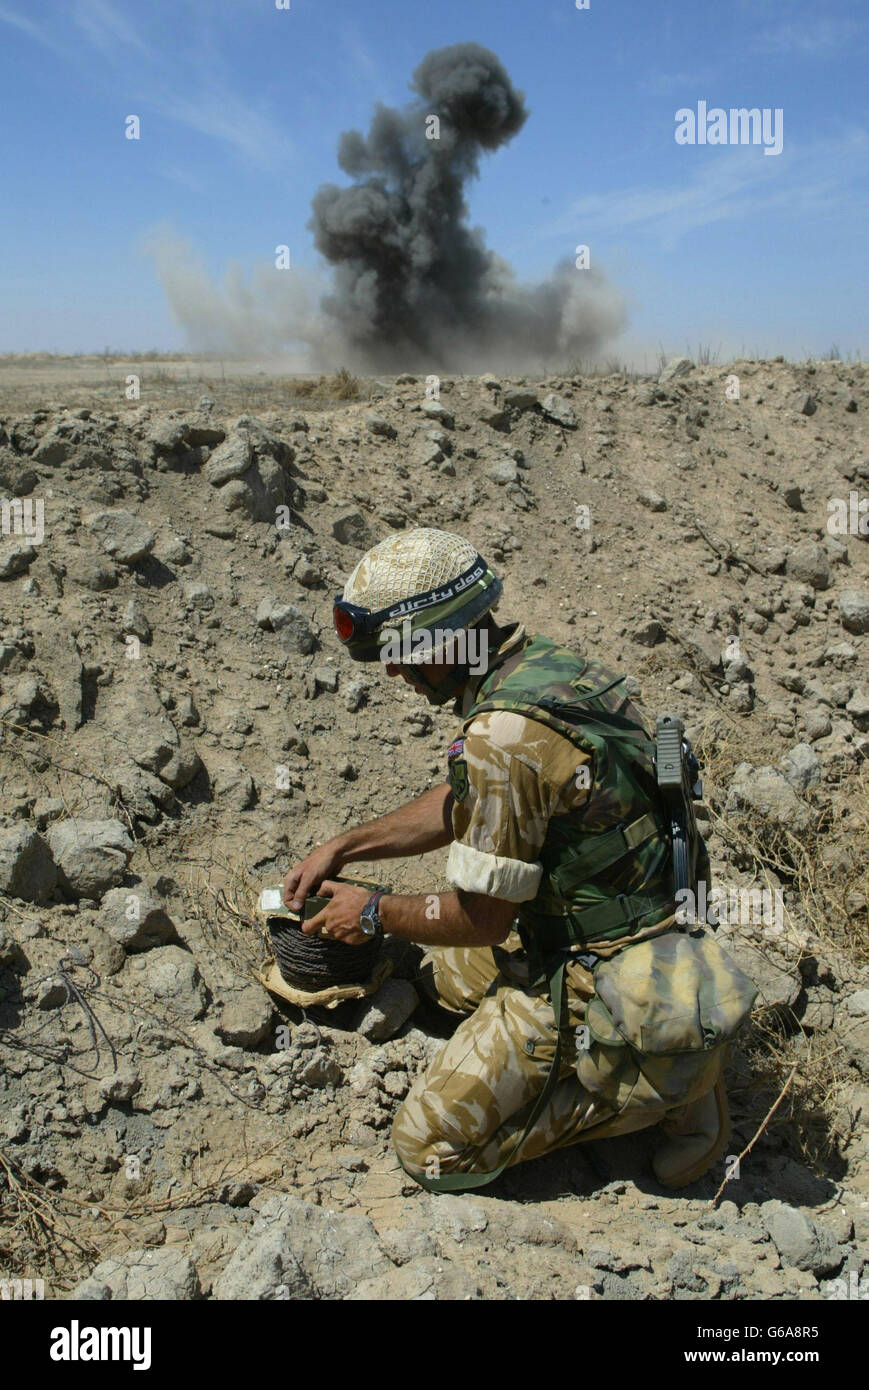 Engineers from The 1st Battalion The Parachute Regiment dispose of unexploded bomblets found in the desert near their base in the southern Iraqi oilfields. * The region is littered with unexploded ordnance including anti-tank and anti-personnel mines which are detonated in place for the safety of the coalition troops and local civilians. Stock Photo